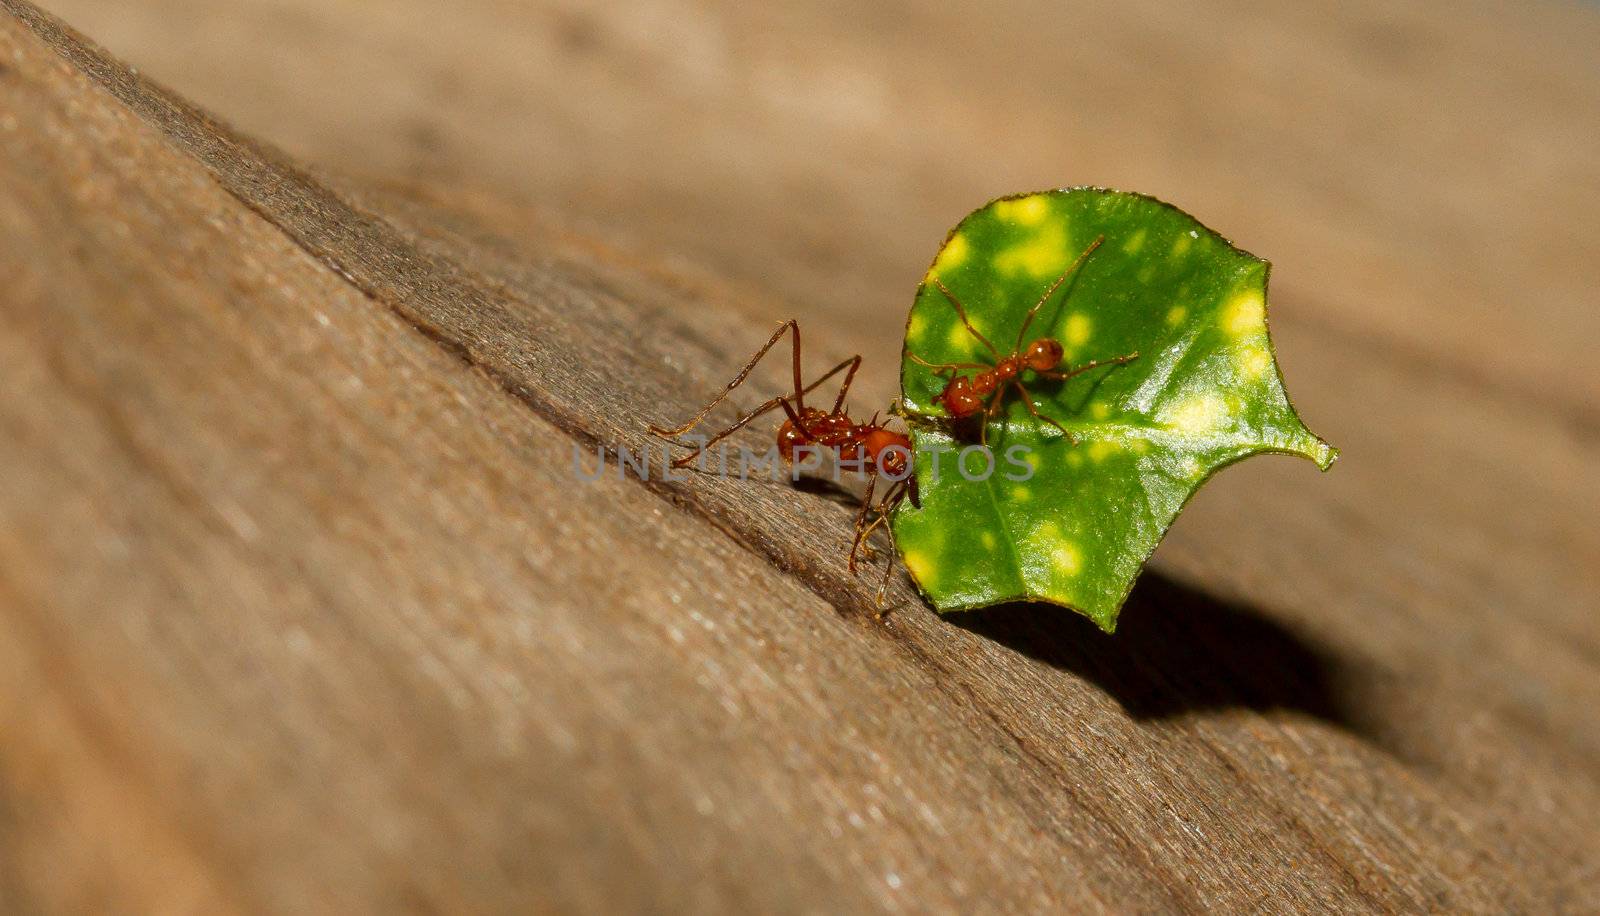 A leaf cutter ant by michaklootwijk